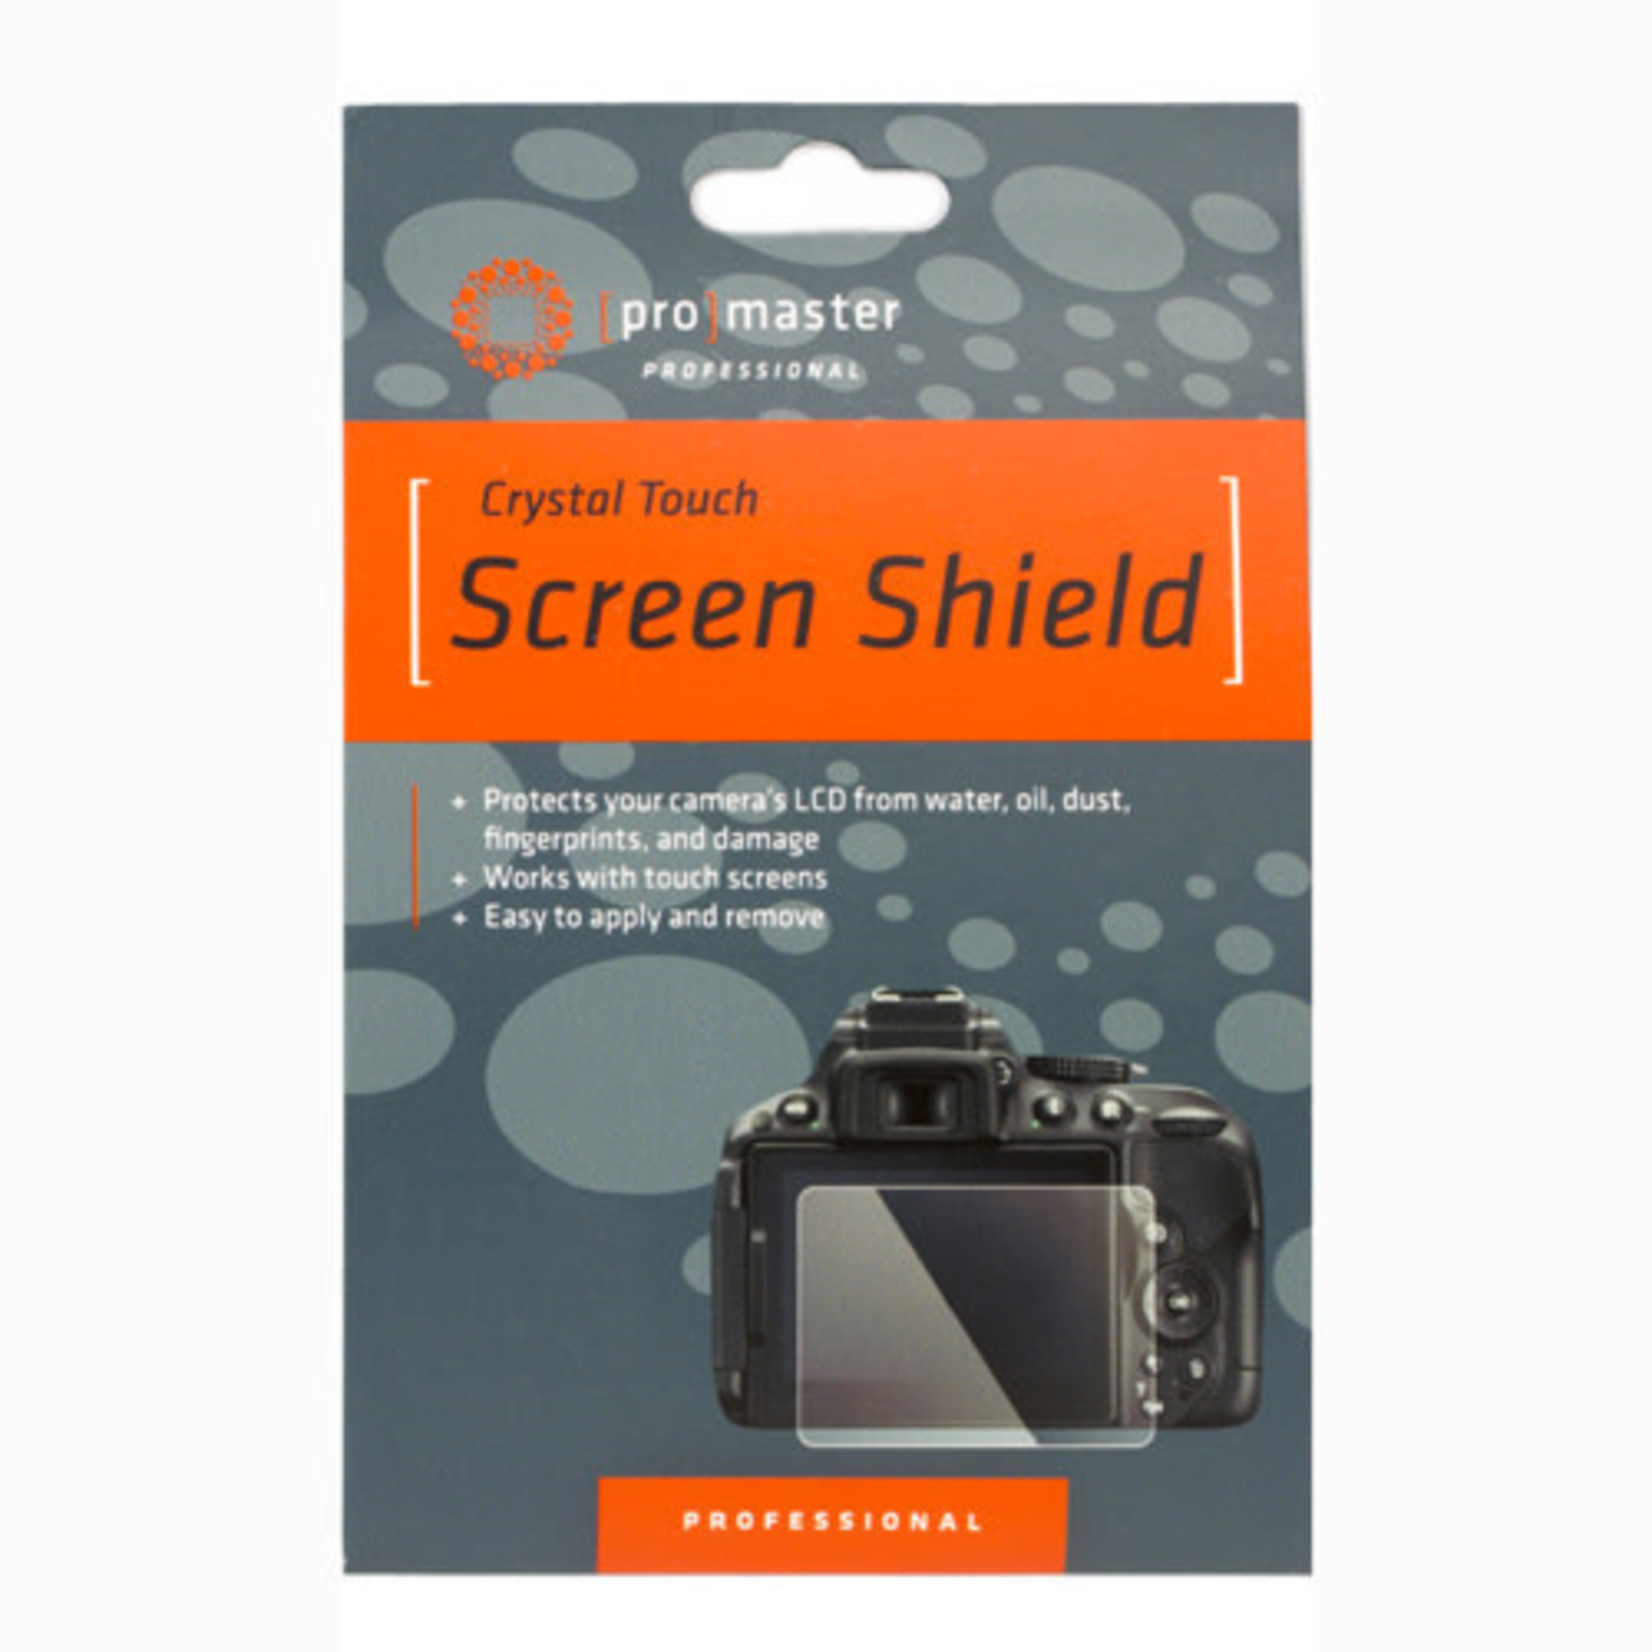 ProMaster Crystal Touch Screen Shield - Sony A1, A7C, A7RIV, A7III, A7RIII, A9, A9II A7II, A7RII, A7SII, A7SIII, RX100, RX100II, RX100III, RX100IV, RX100V, RX100VA, RX100VI, RX100VII, RX10, RX10 II, RX10 III, RX10 IV, RX1, RX1R, RX1RII, ZV1